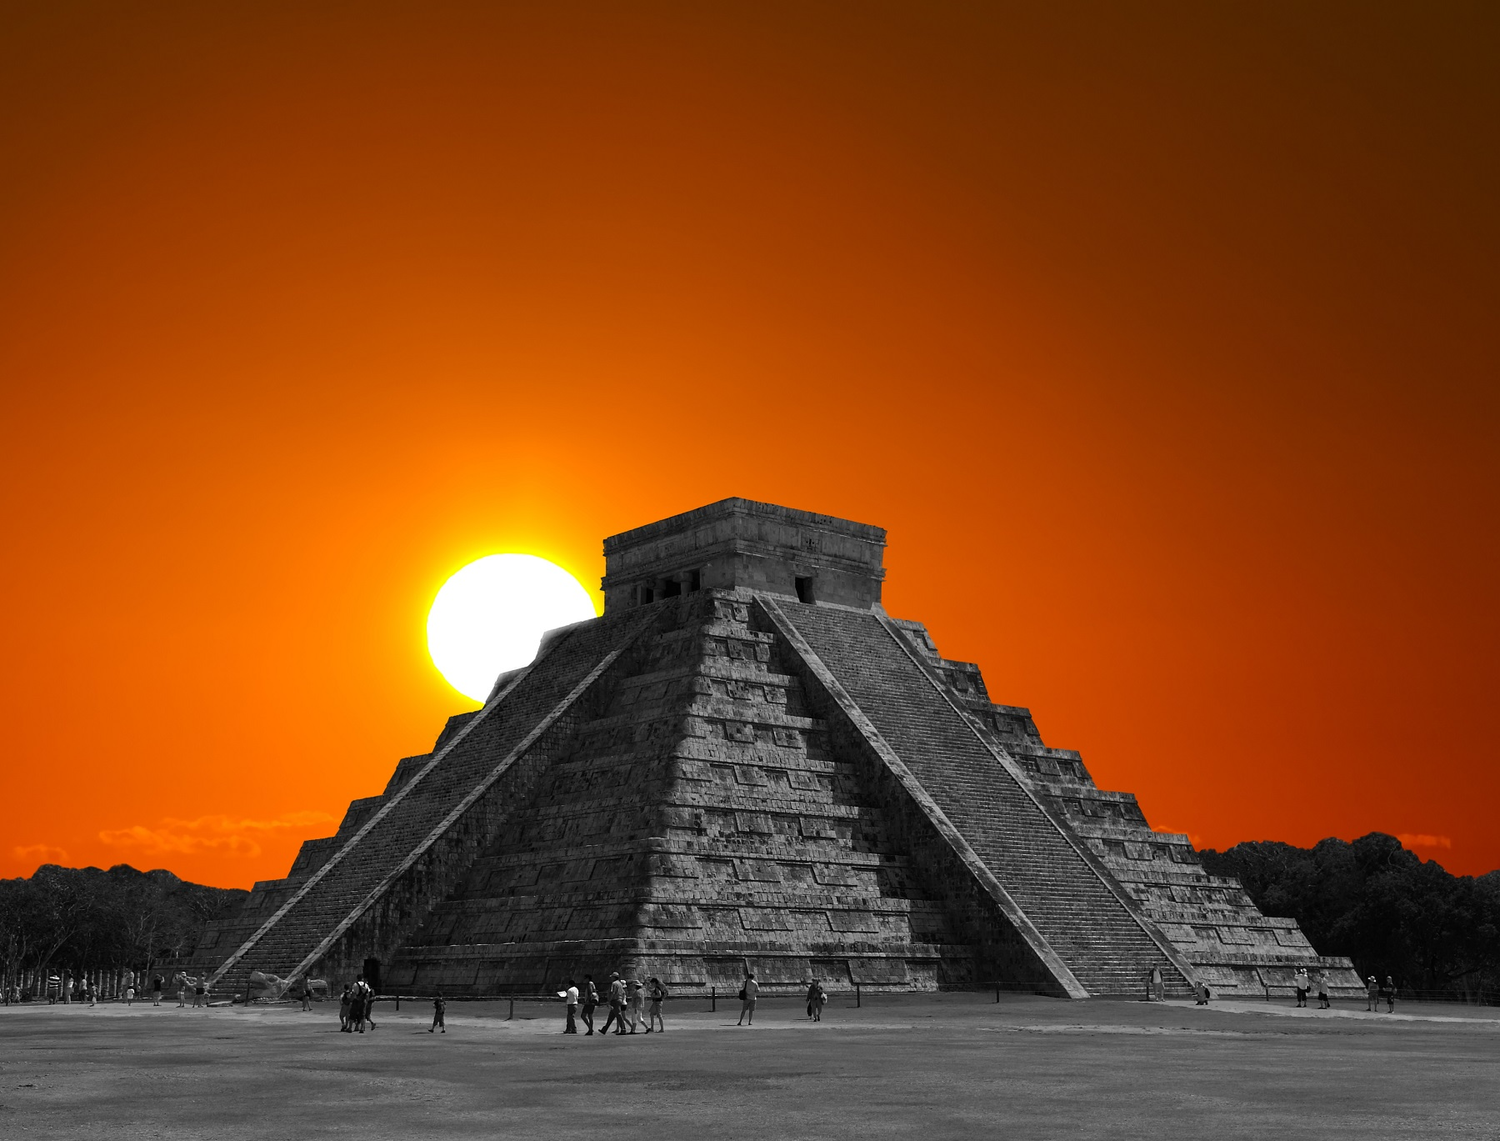 Ancient Mayan Cities are Heavily Contaminated with Mercury